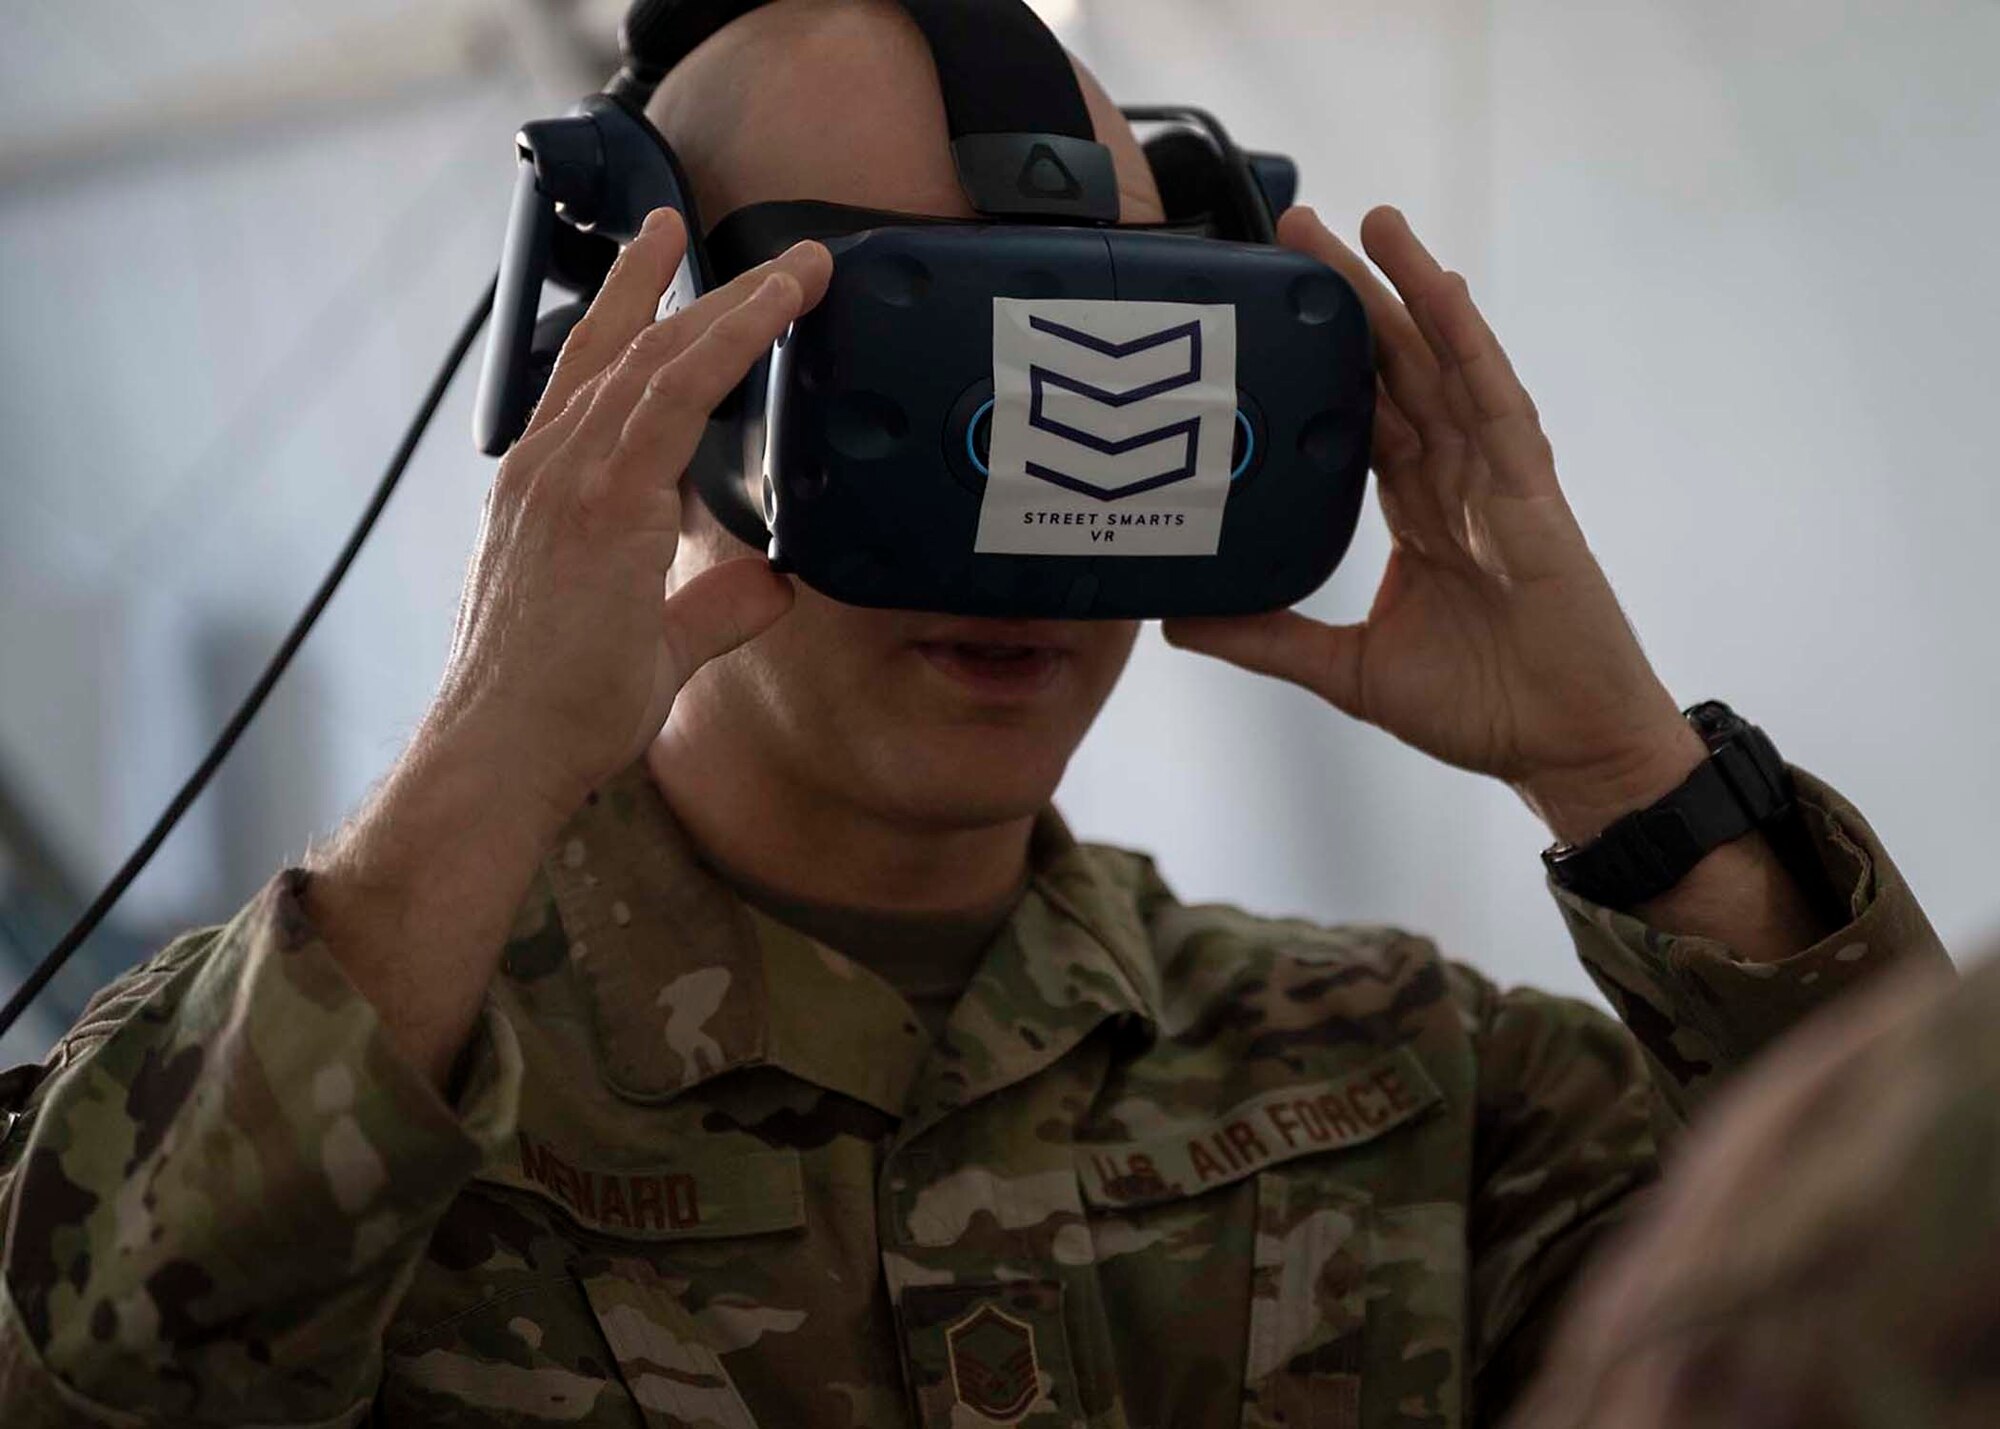 U.S. Air Force Master Sgt. Rory Menard, 380th Expeditionary Security Forces Squadron logistics and supply superintendent, calibrates a virtual reality (VR) system at Al Dhafra Air Base, United Arab Emirates, Jan. 20, 2020.